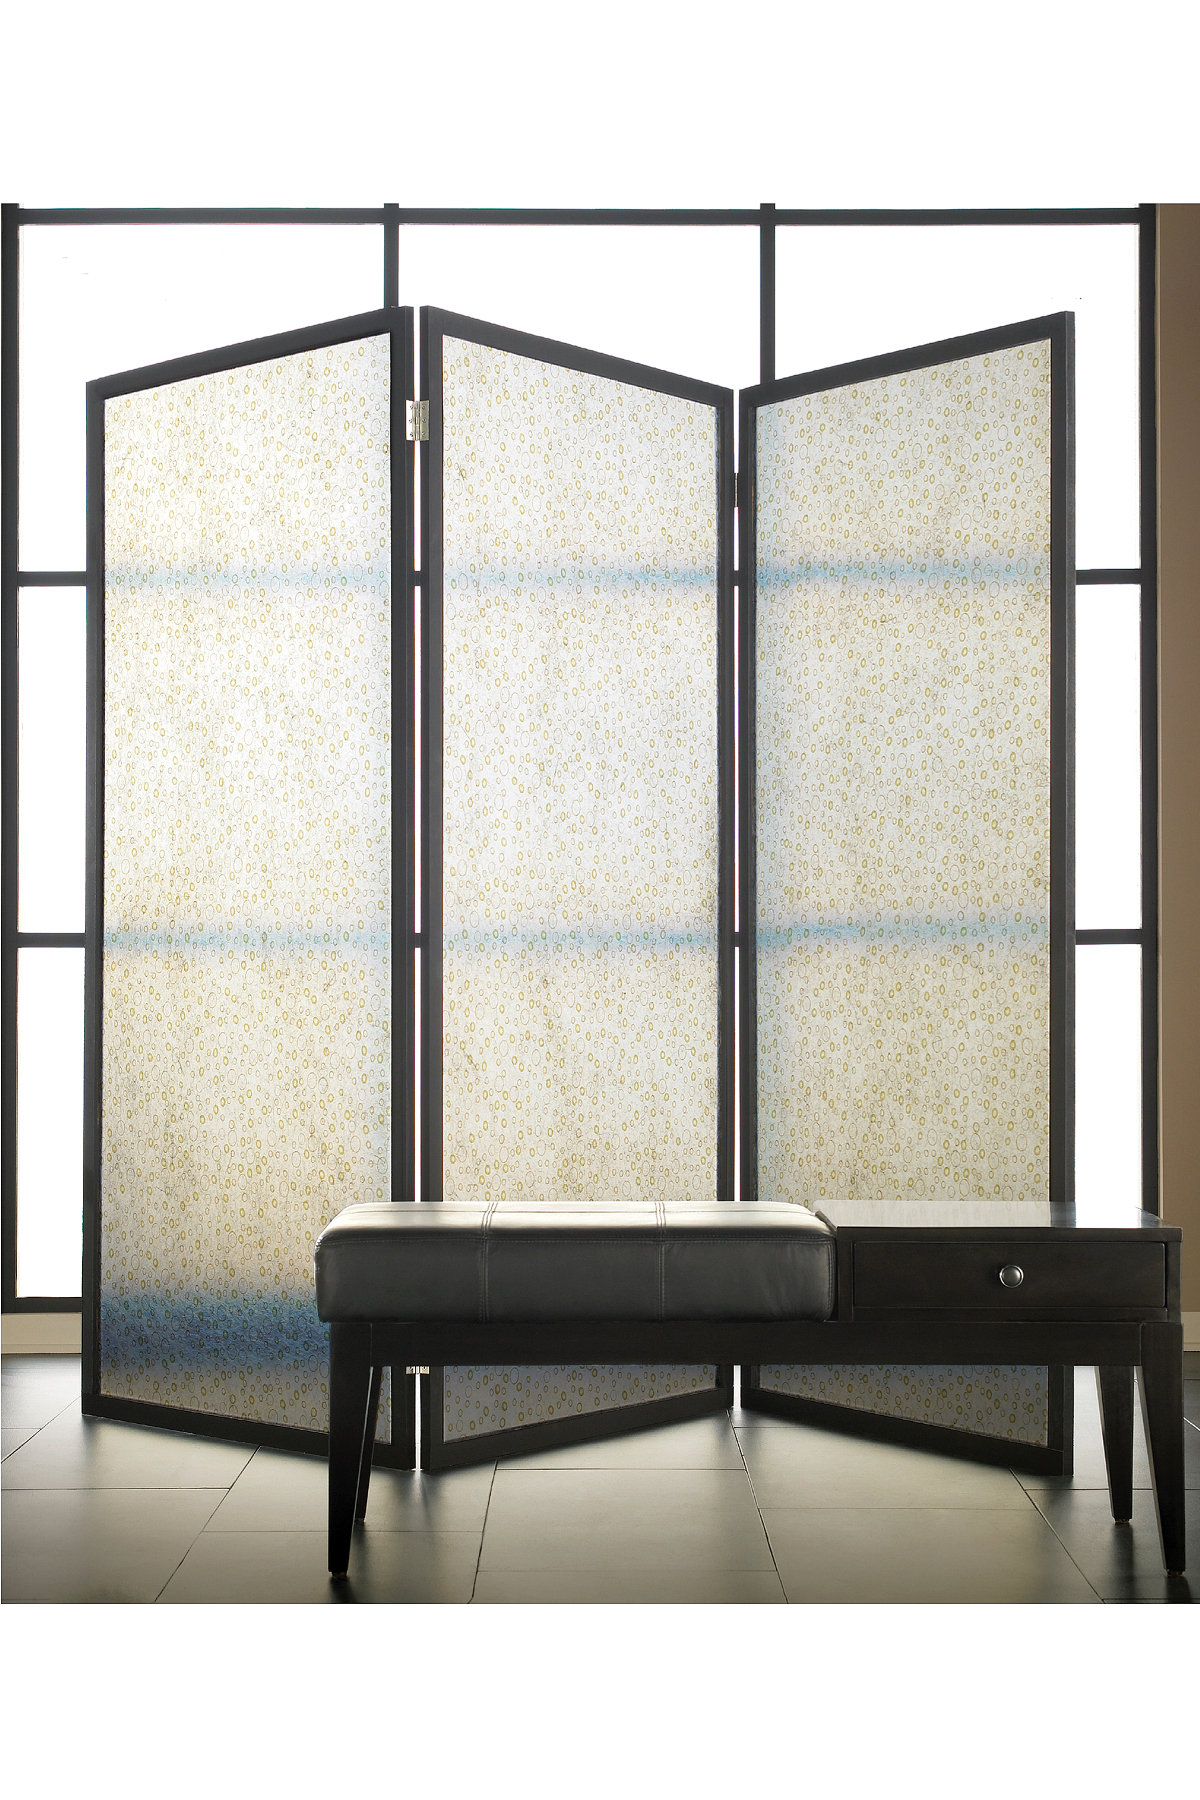 Outwater’s LuxCore™ Translucent and Laminate Panels